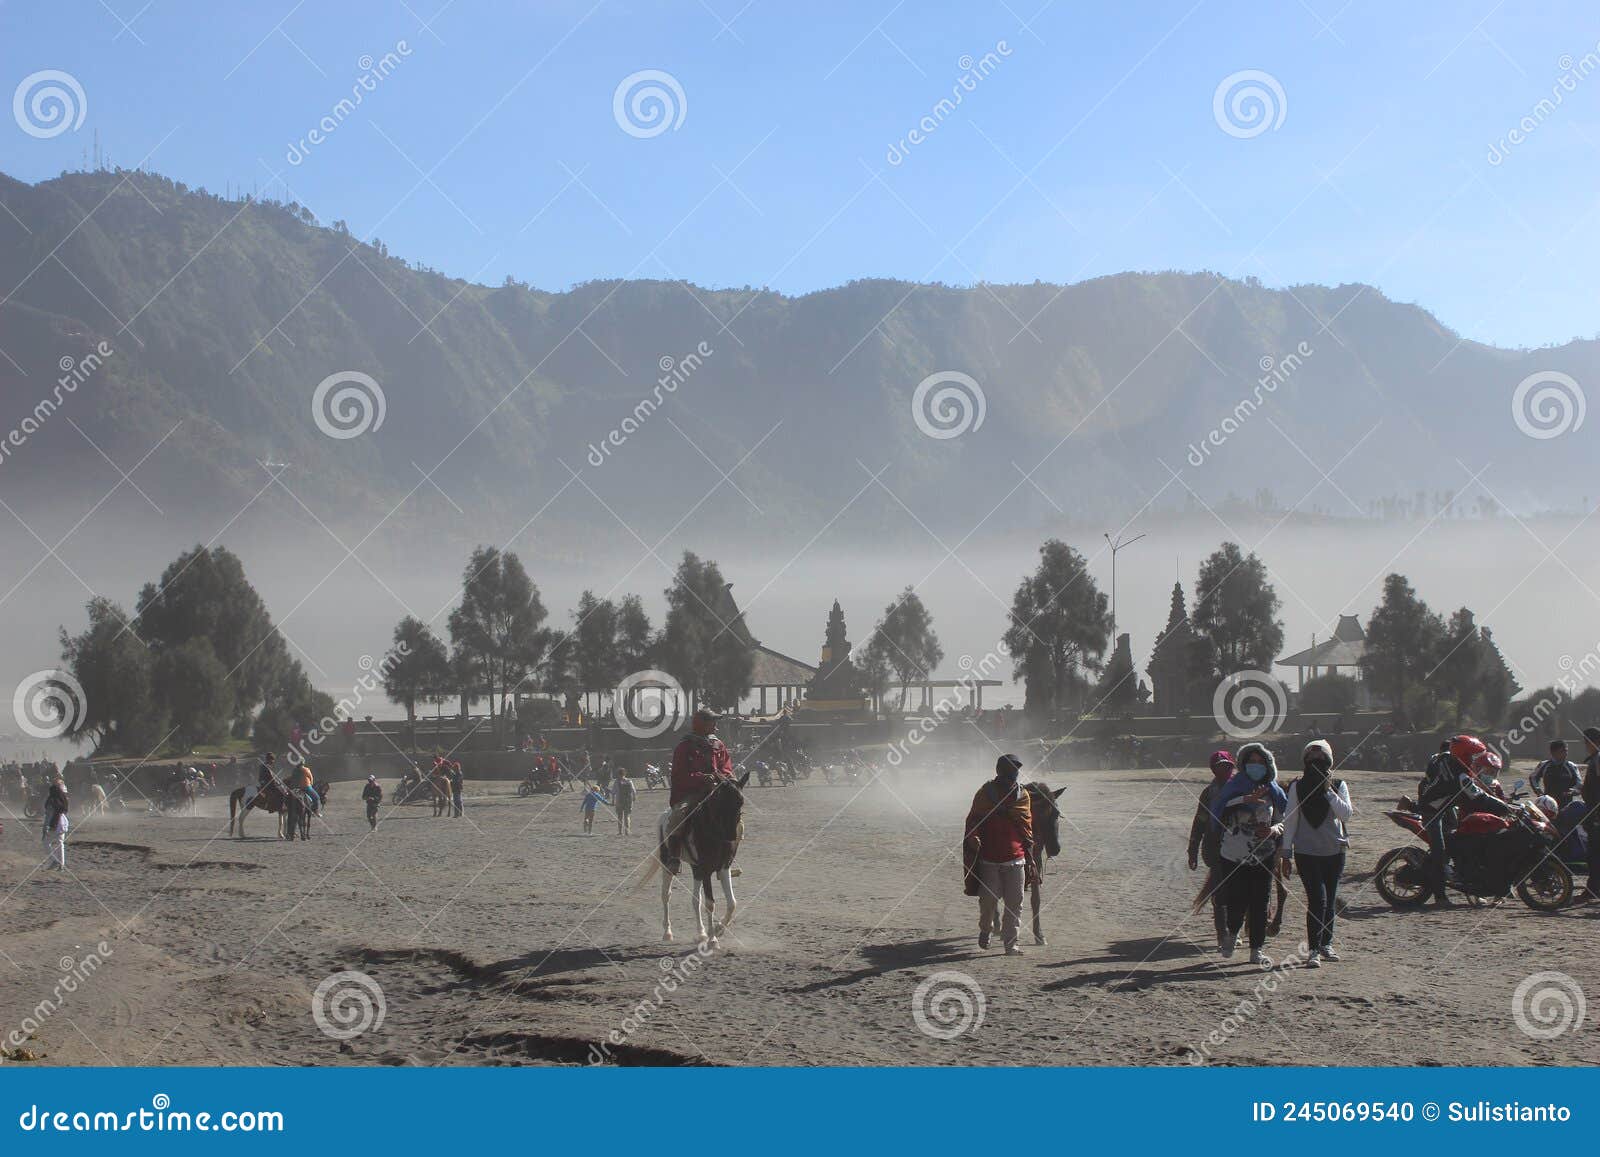 The Atmosphere in the Sea of Sand of Mount Bromo in the Bromo Tengger